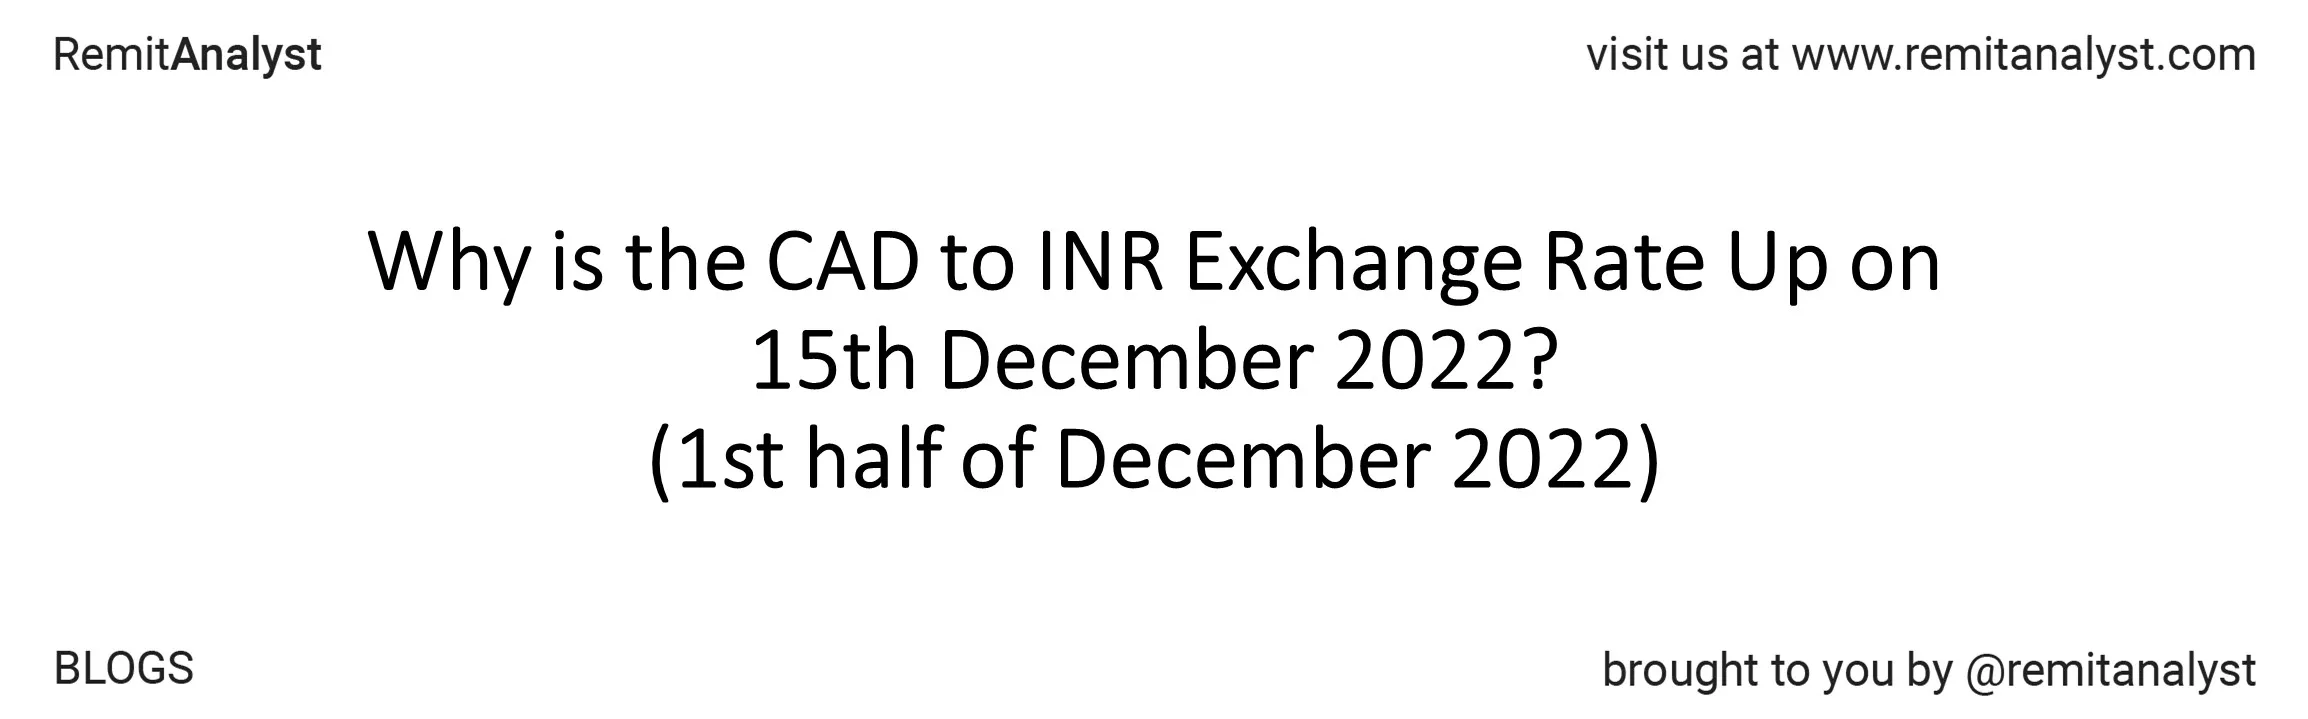 cad-to-inr-exchange-rate-from-1-dec-2022-to-15-dec-2022-title